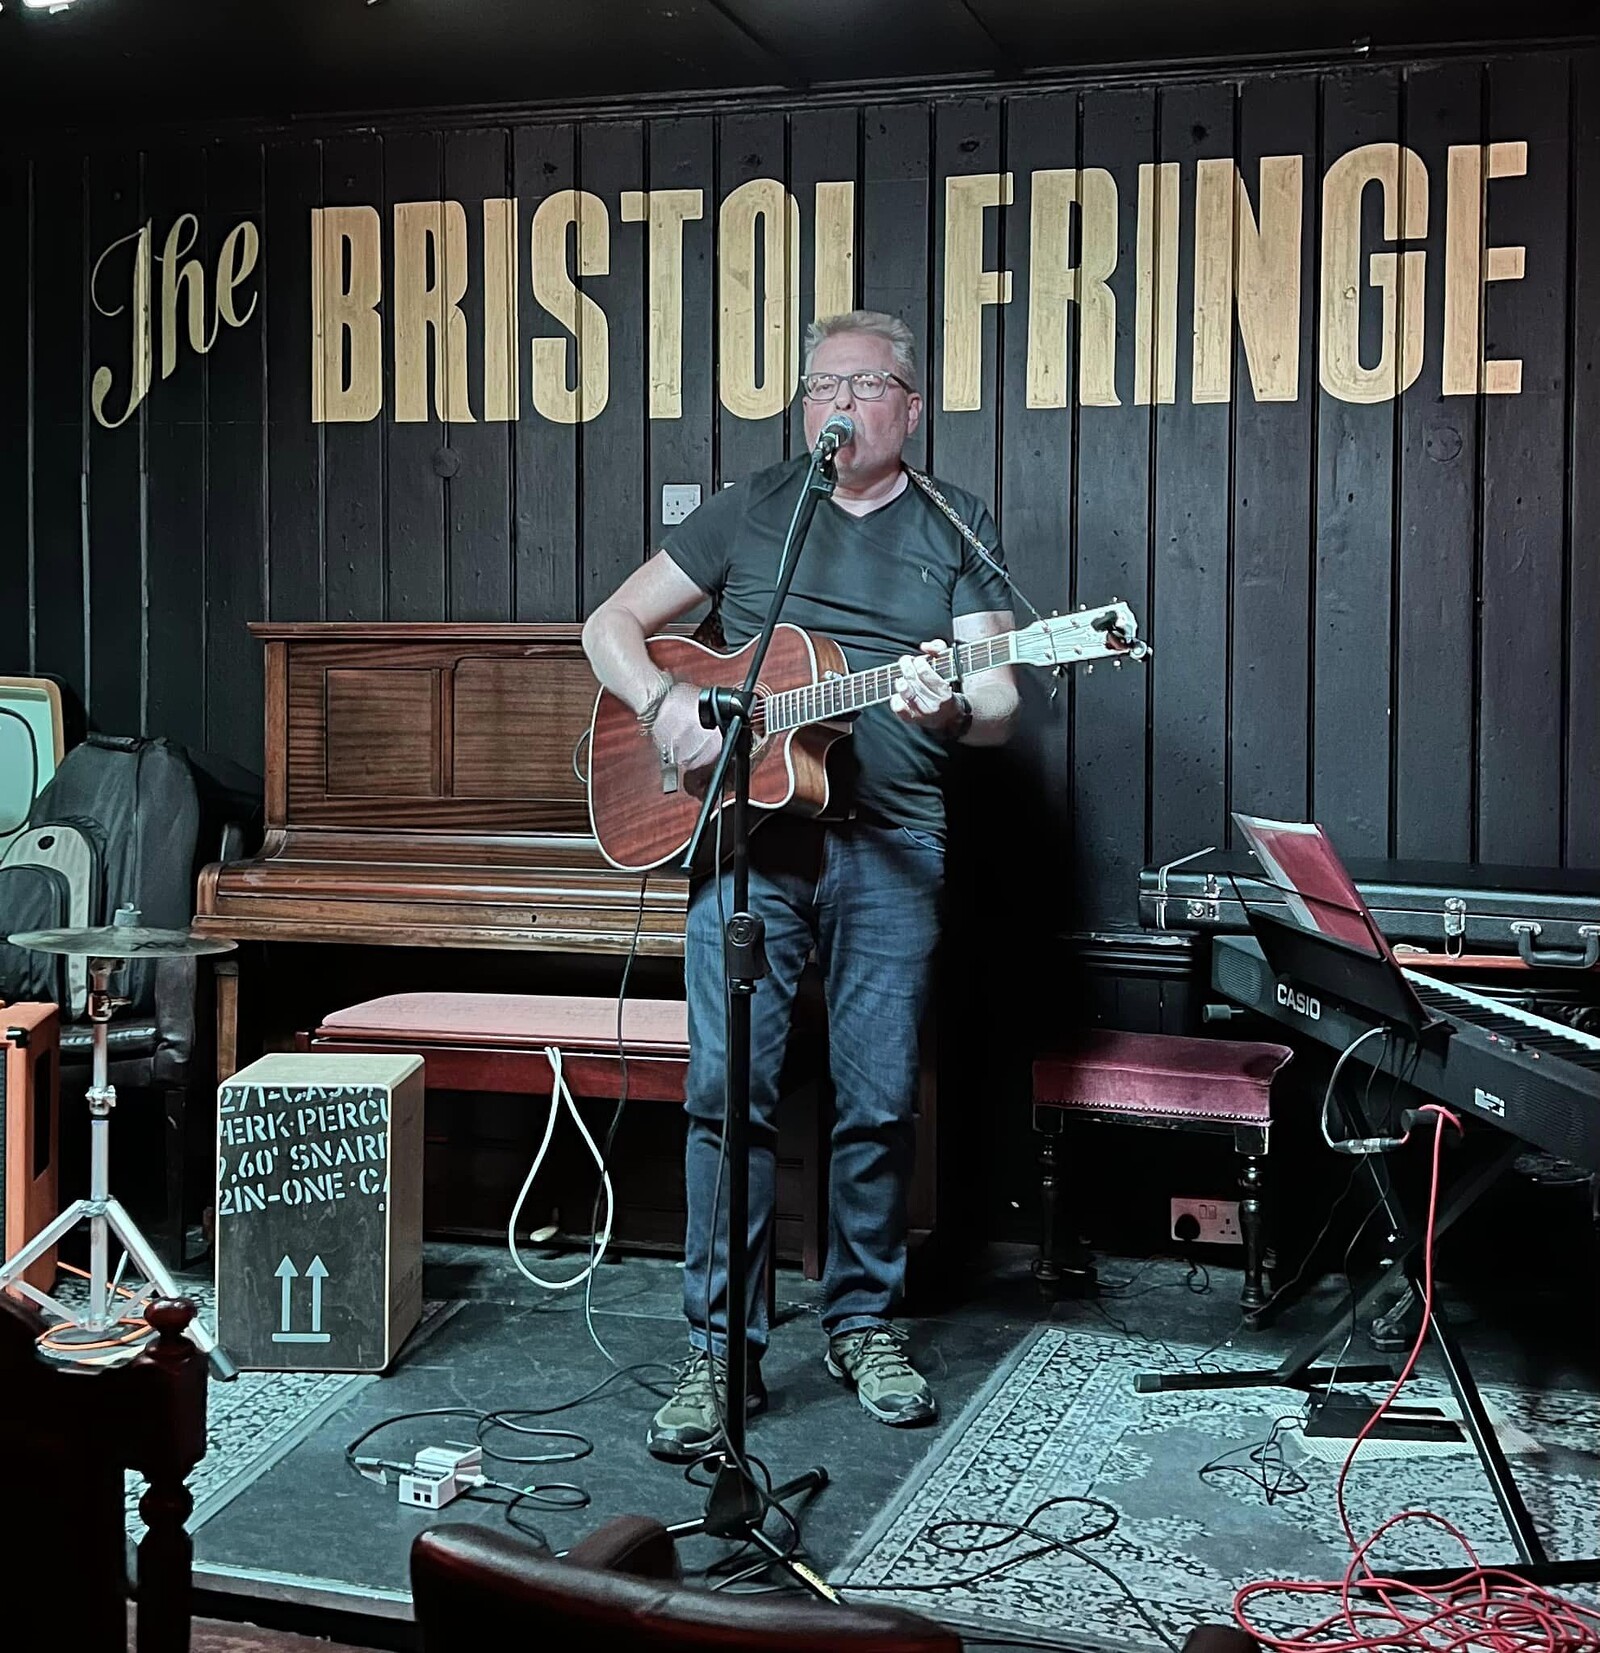 Songwriters Showcase at The Bristol Fringe